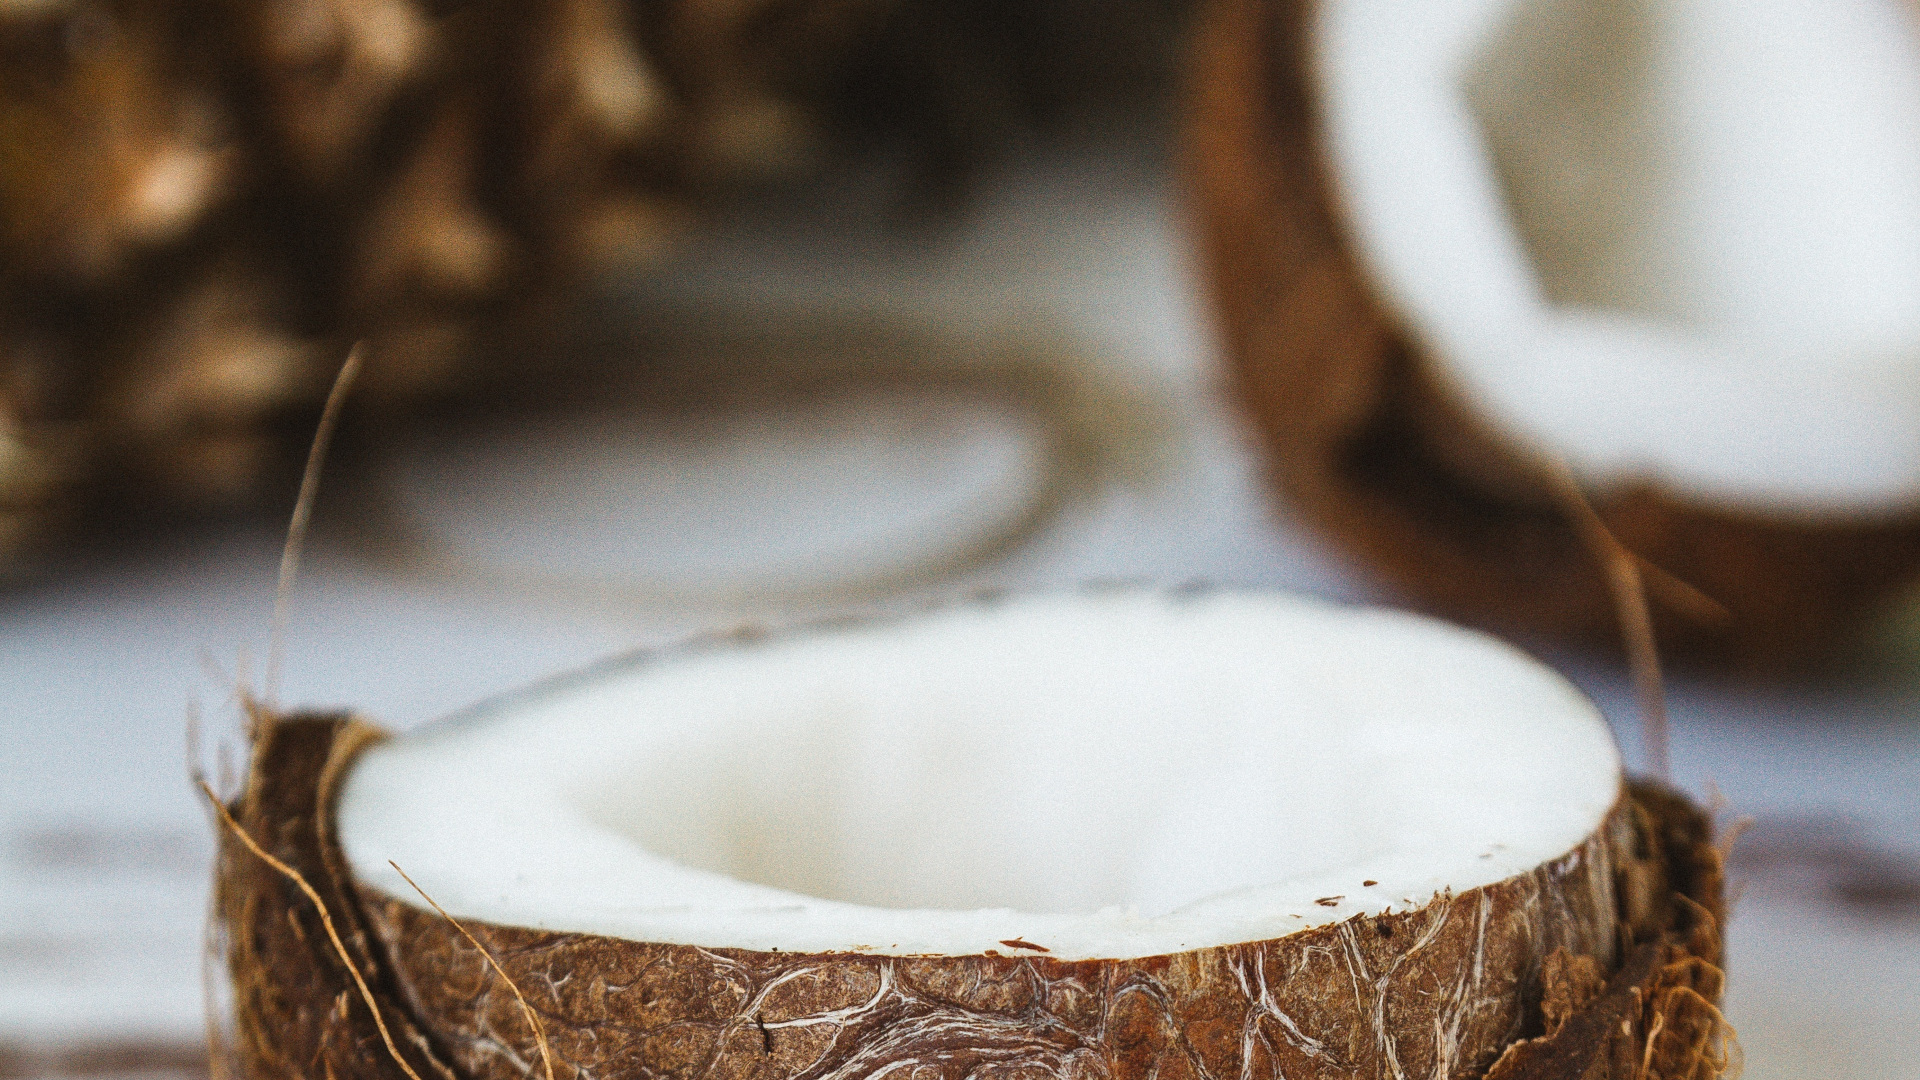 Whole Opened Coconut used to make Coconut Carrier Oil